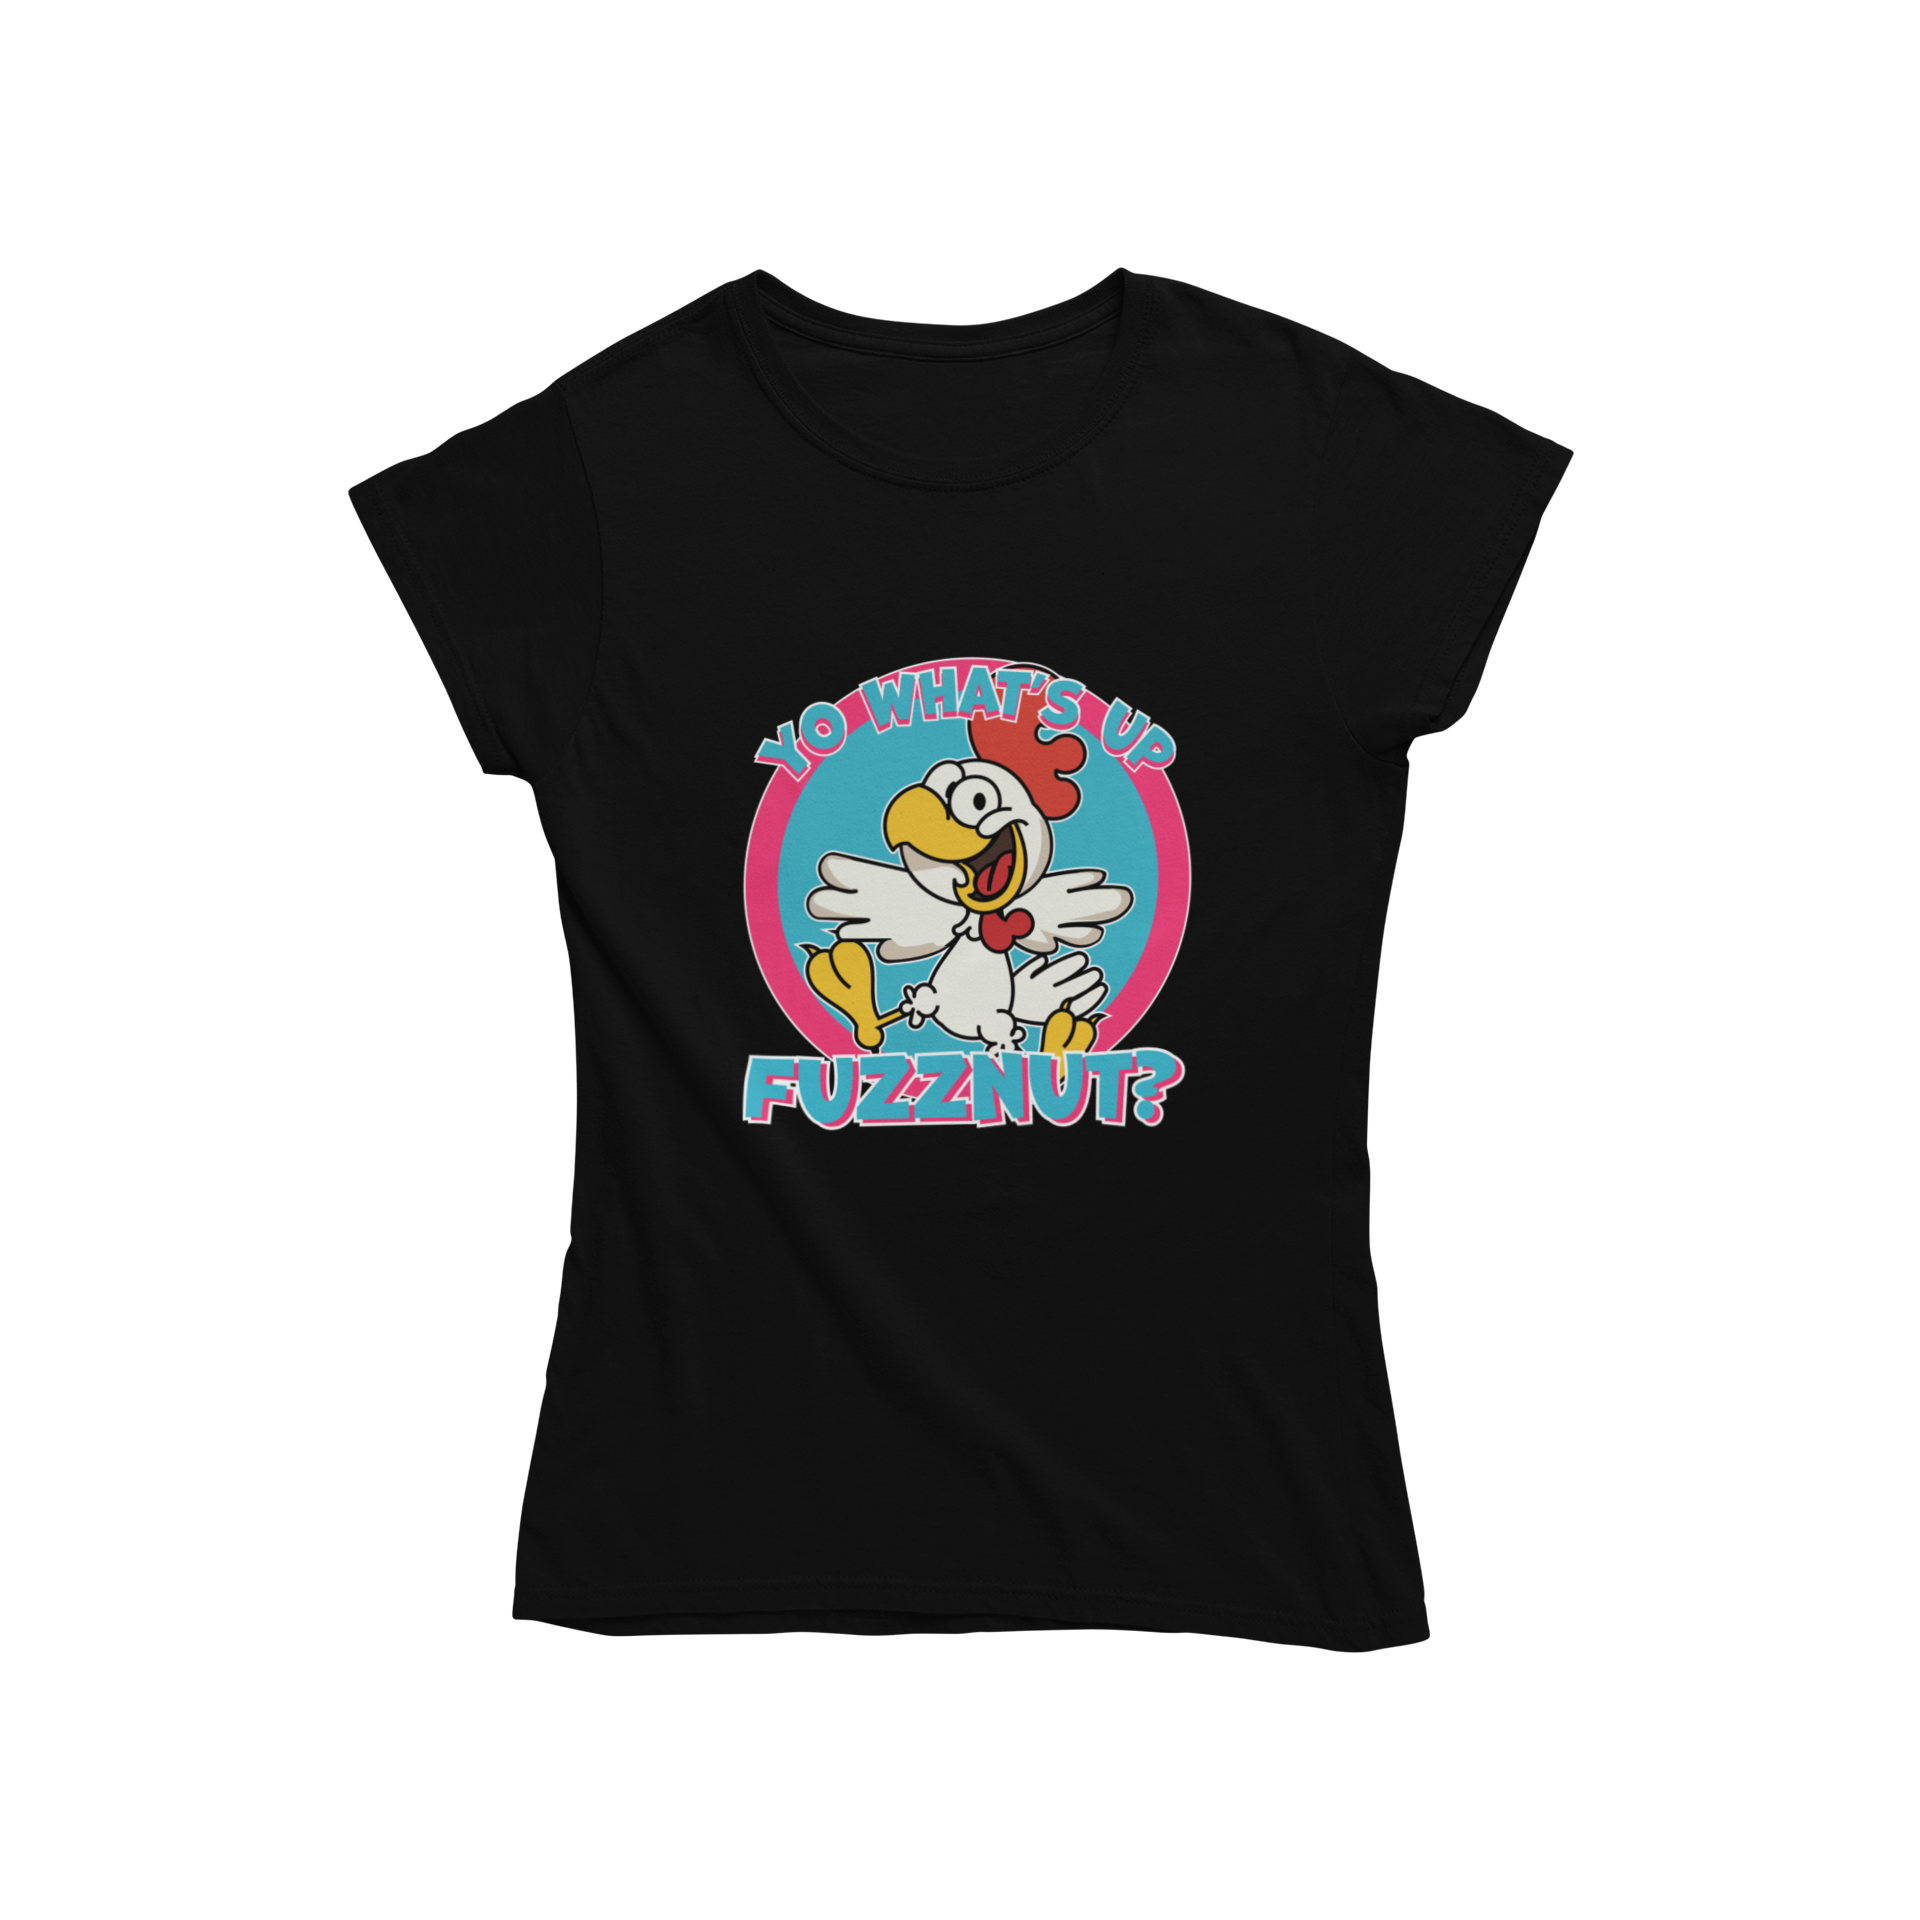 Step up your fashion game with teevolution's graphic women's fitted t-shirt! Inspired by the catchy song "Bad Hair Day," this tee features a fun and quirky design that will surely turn heads. Get ready to rock your style with a confident "Yo, what's up fuzznut!"